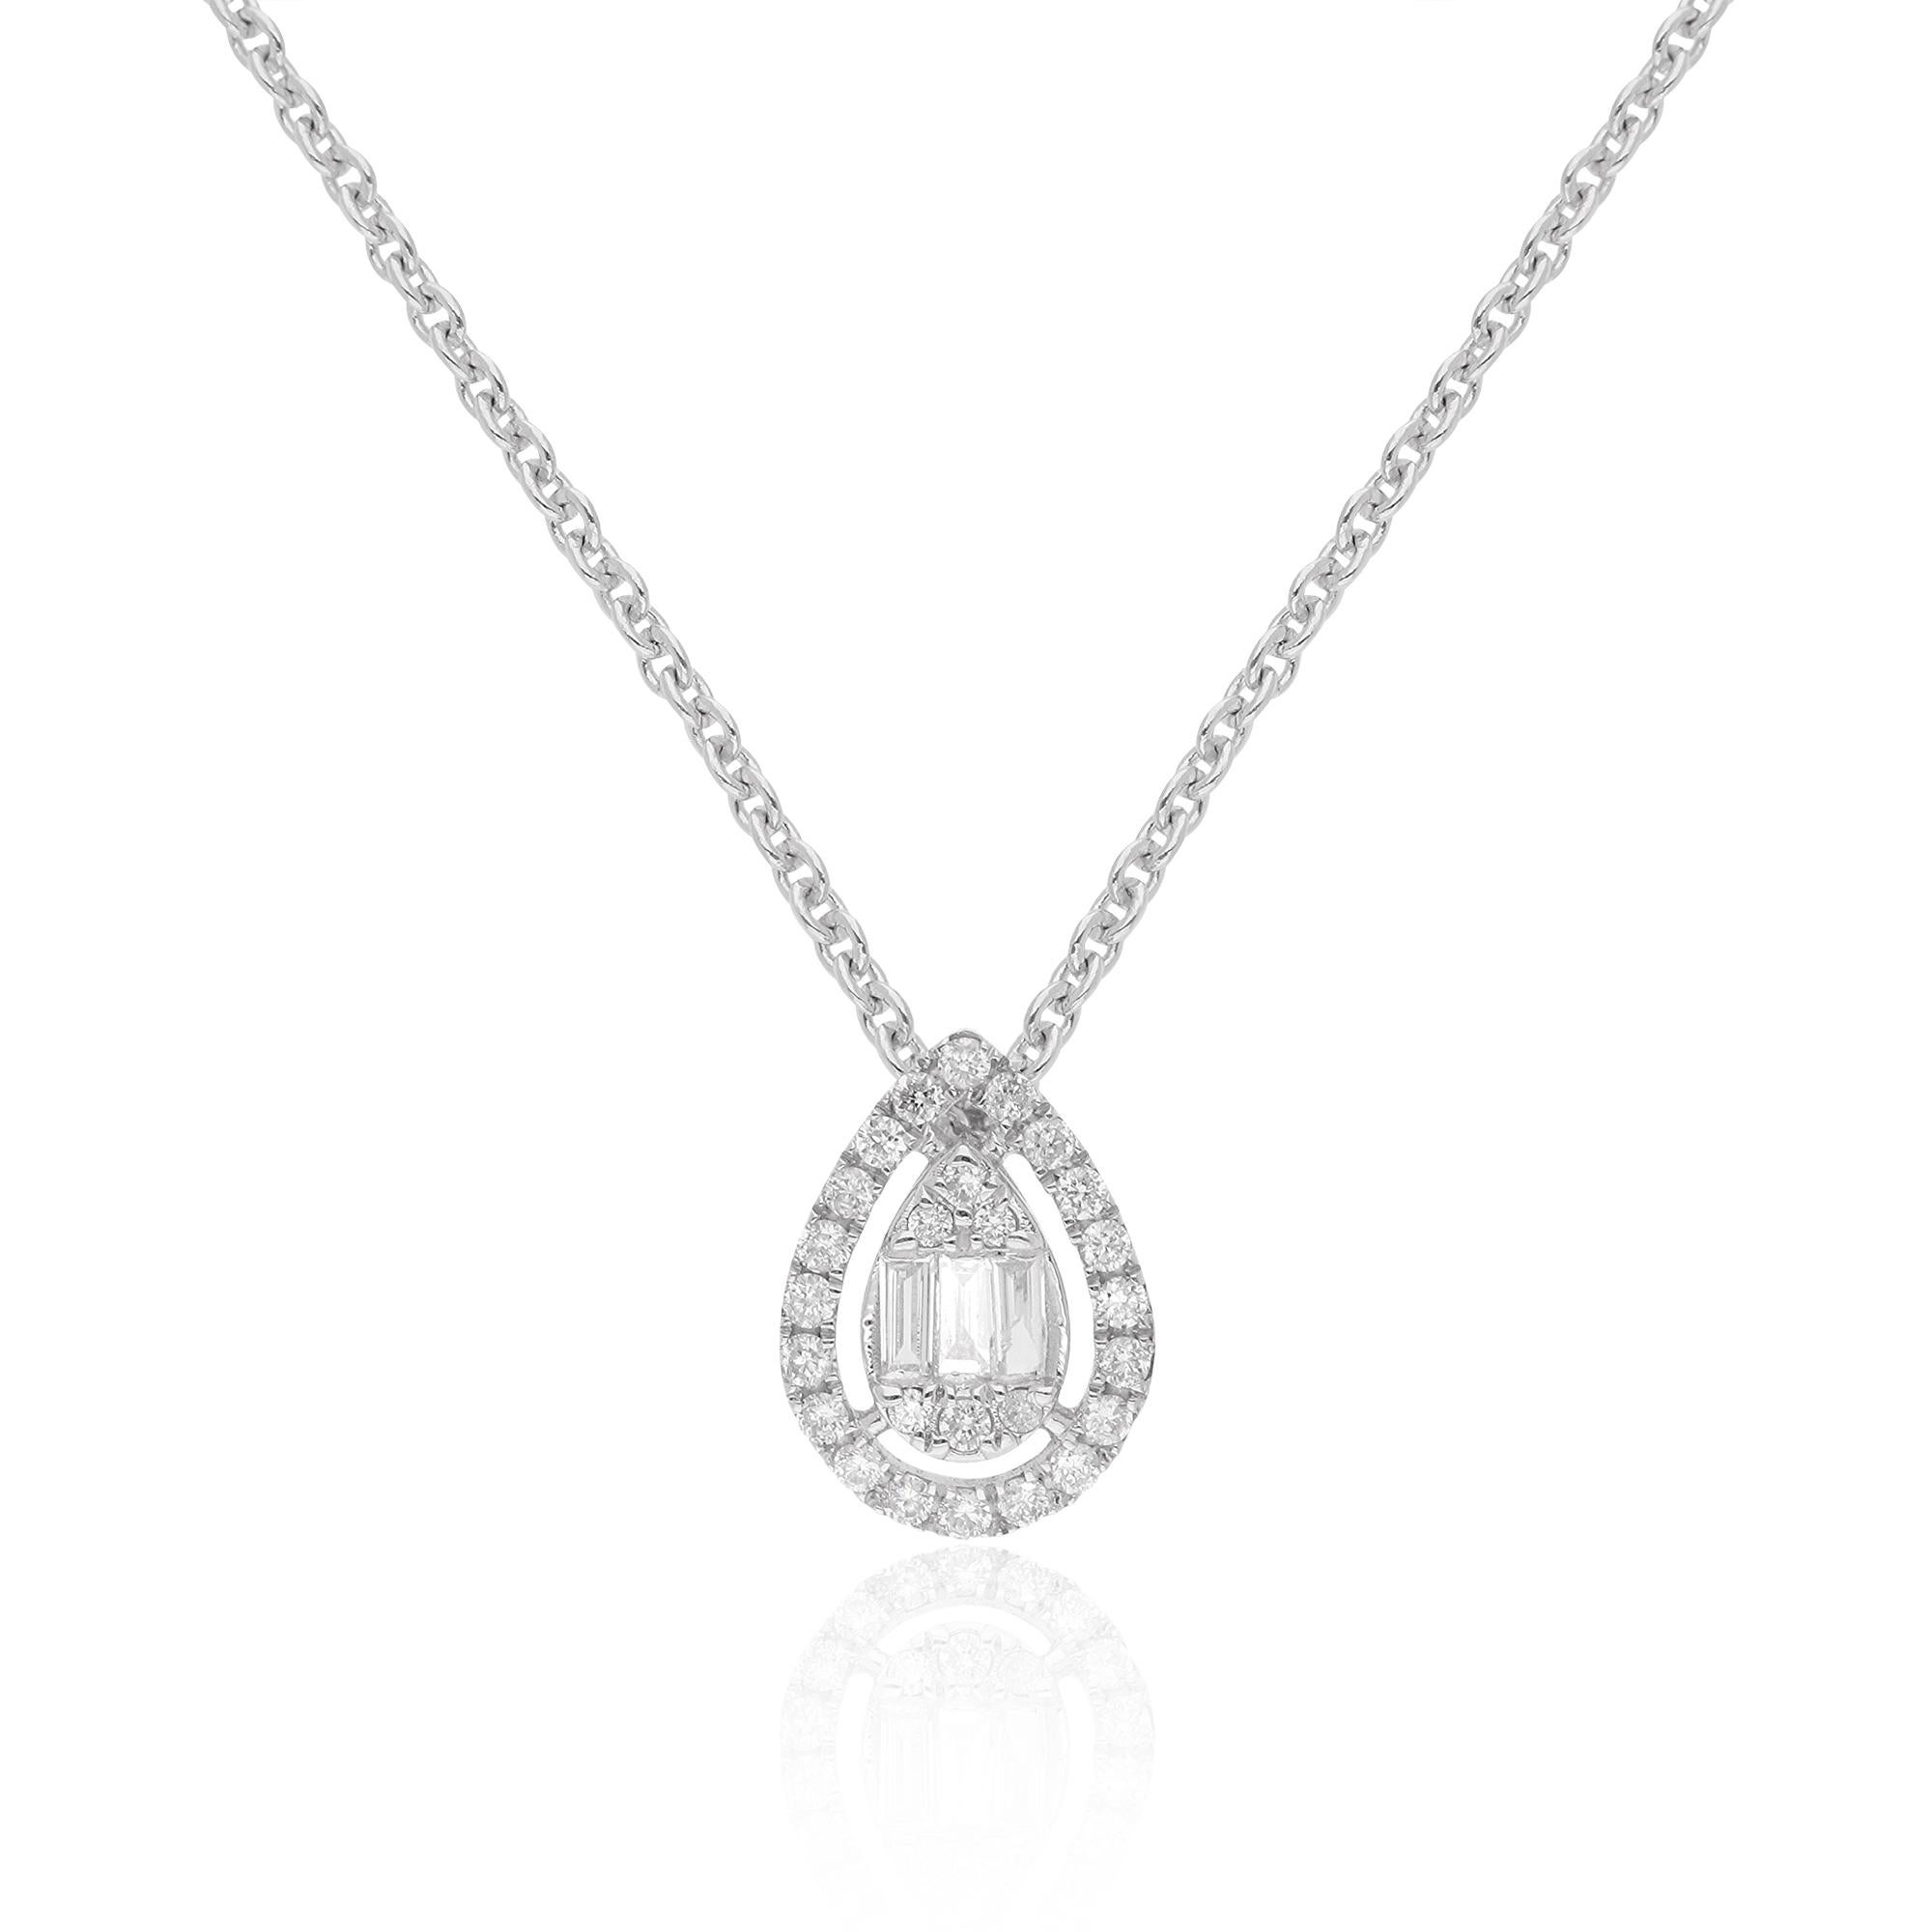 Item Code :- CN-16942
Gross Wt. :- 4.31 gm
18k Solid White Gold Wt. :- 4.26 gm
Natural Diamond Wt. :- 0.25 Ct.  ( AVERAGE DIAMOND CLARITY SI1-SI2 & COLOR H-I )
Necklace Length :- 16 Inches Long

✦ Sizing
.....................
We can adjust most